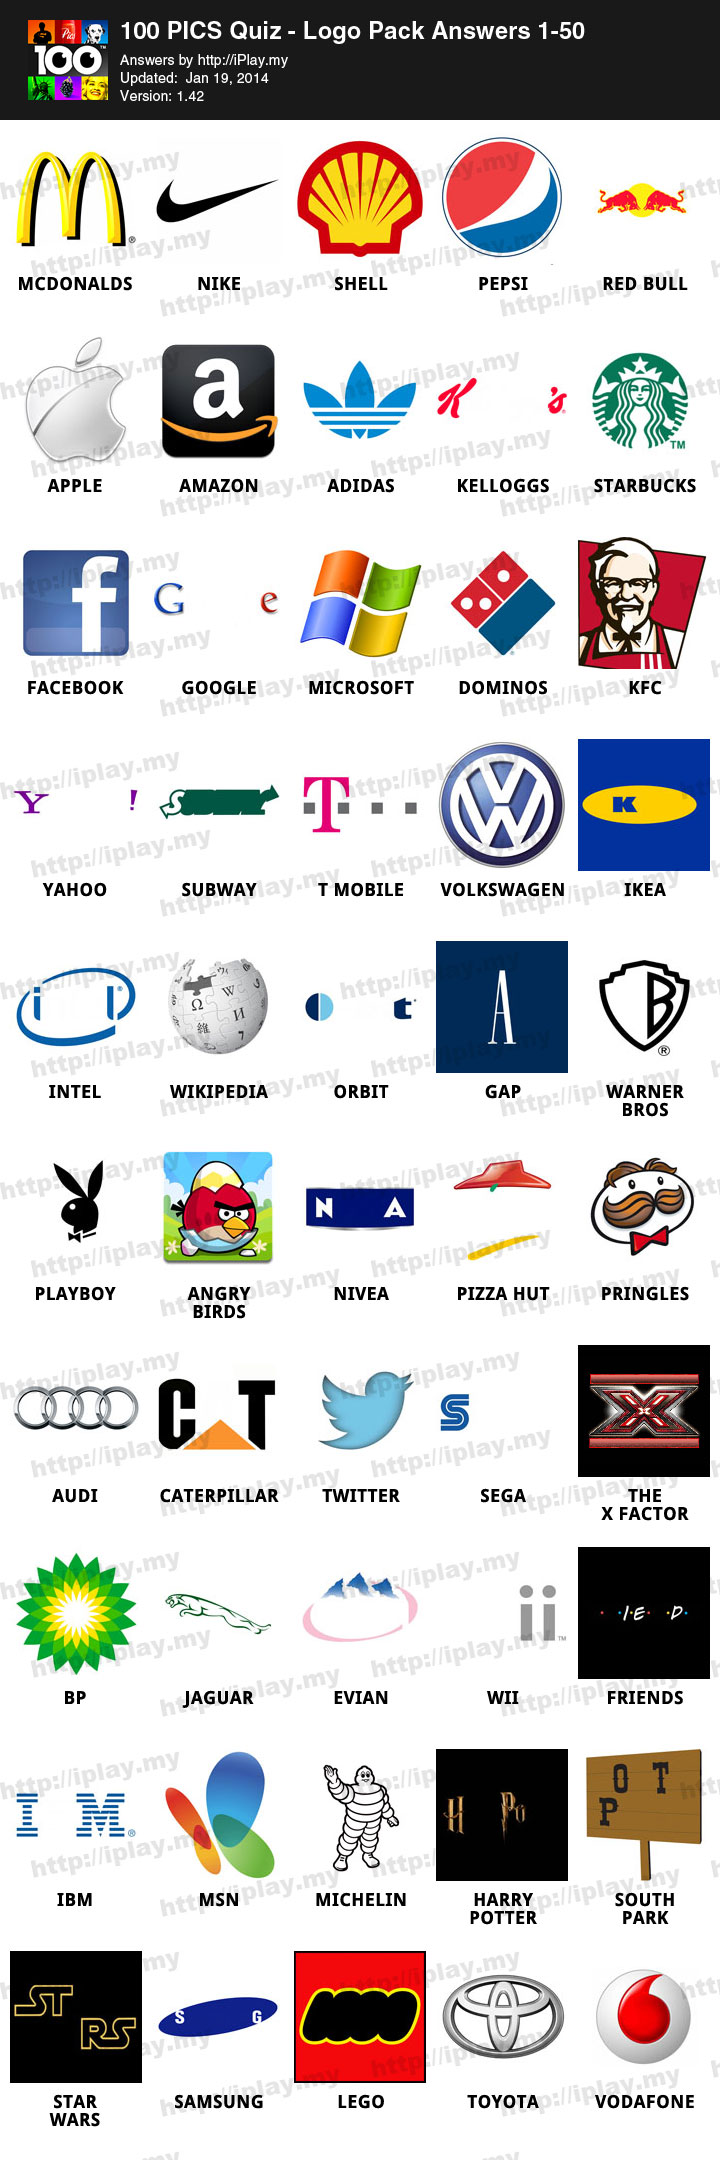 Logos And Names Quiz Answers - Best Design Idea